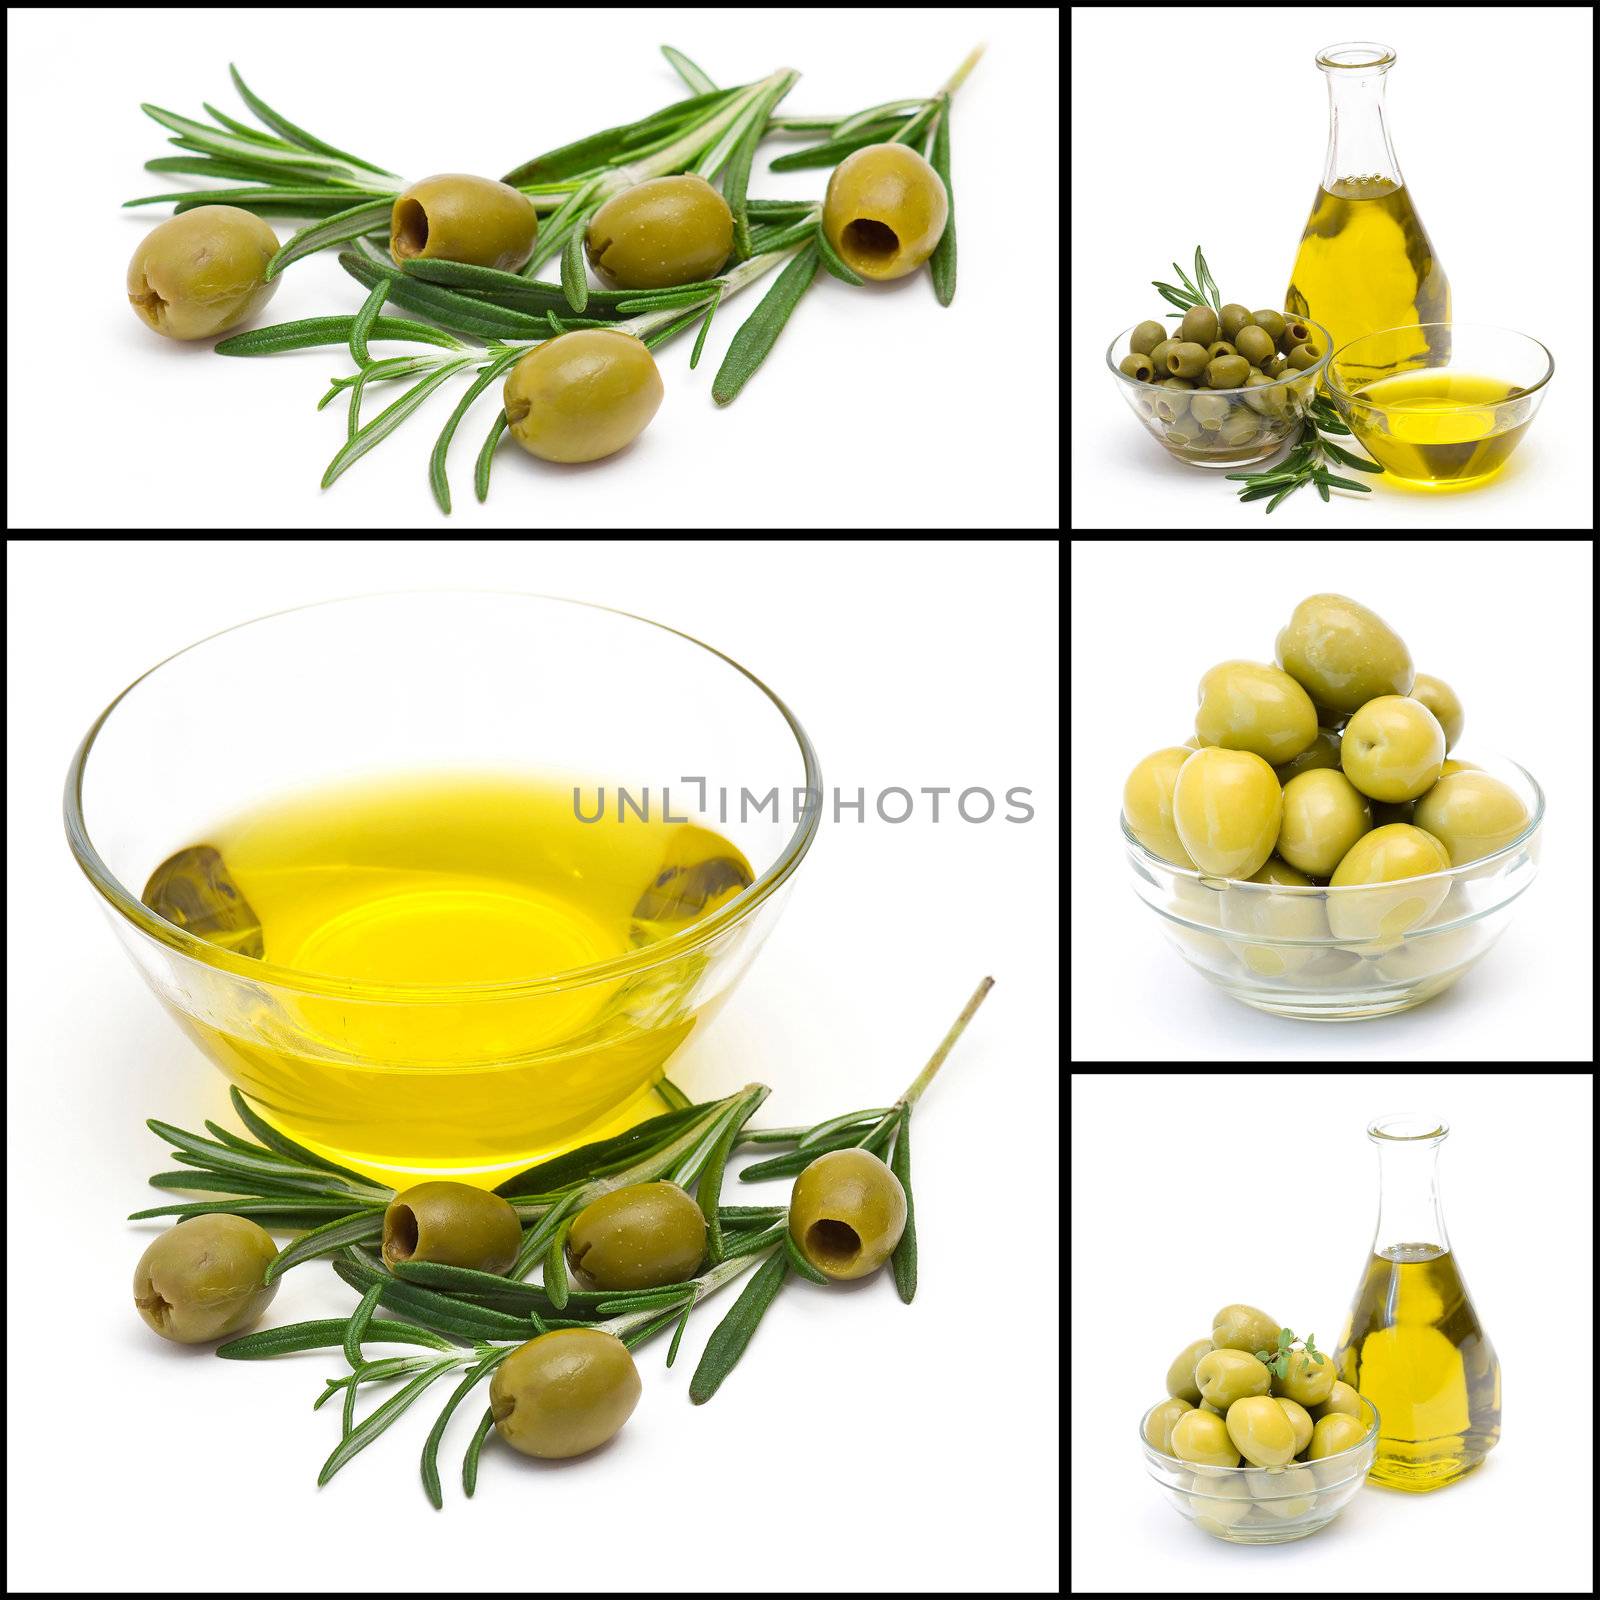 a collage of five pictures of many olives and olive oil by miradrozdowski